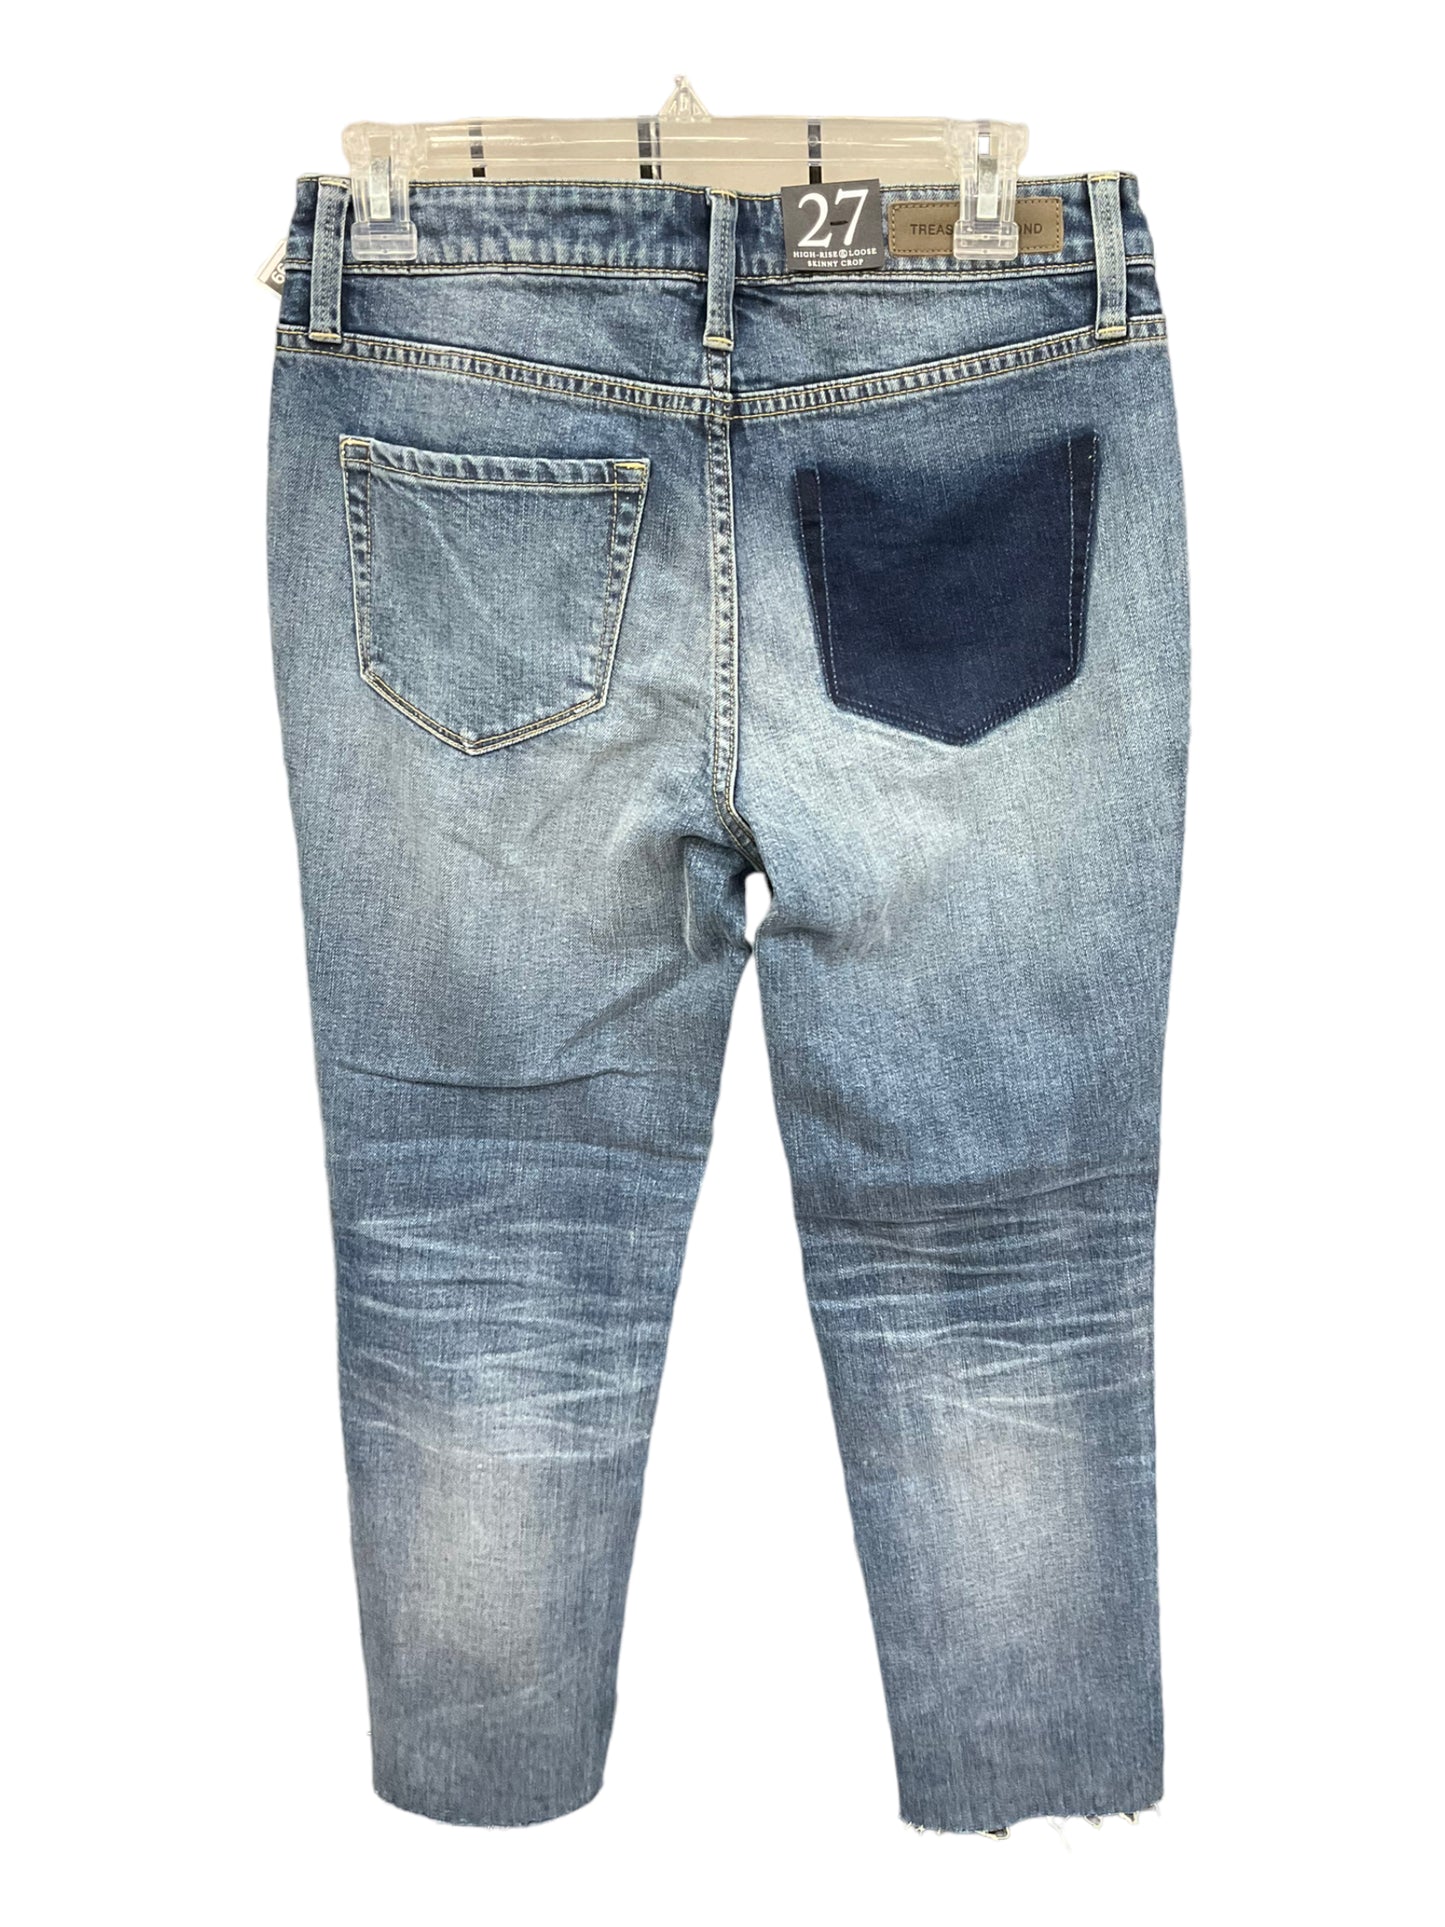 Jeans Straight By Treasure And Bond  Size: 4